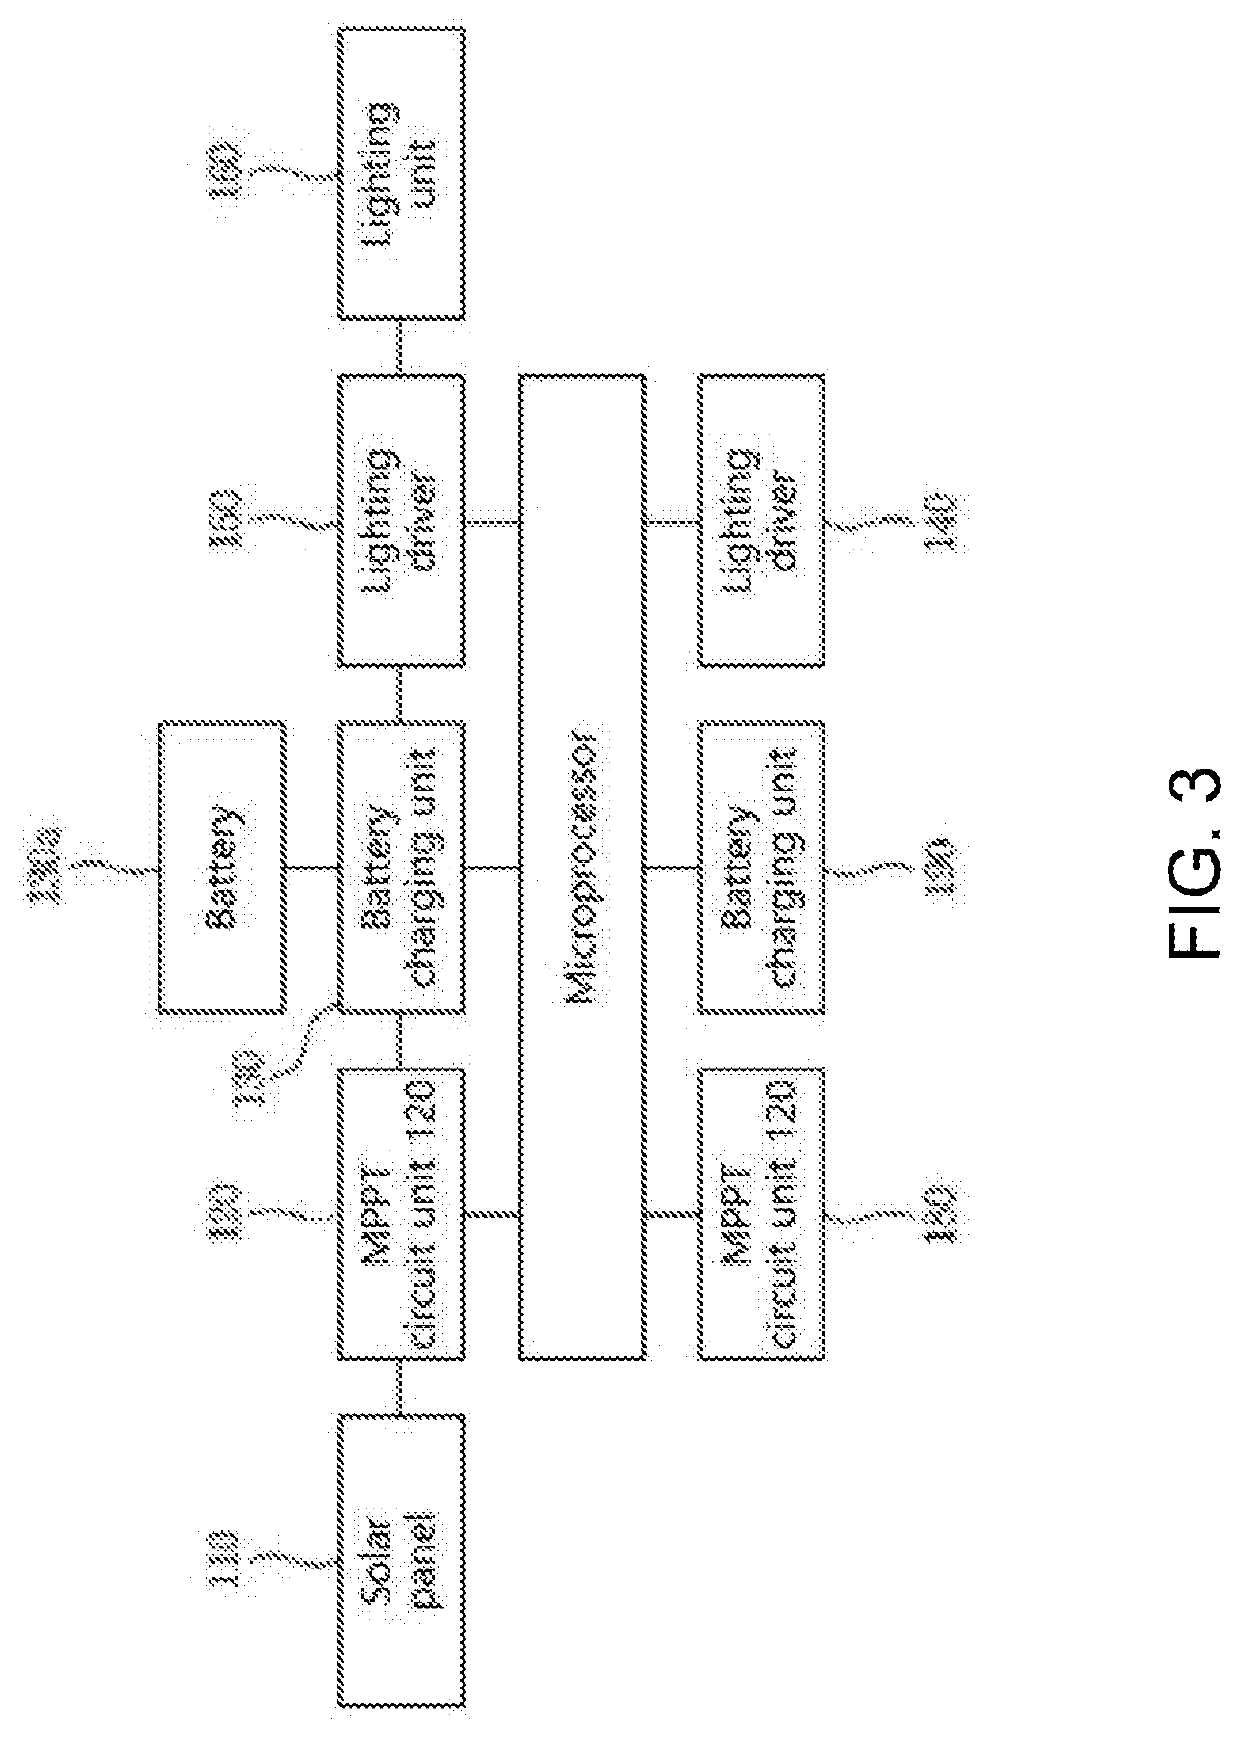 Photovoltaic lighting system having integrated control board, and monitoring system using same